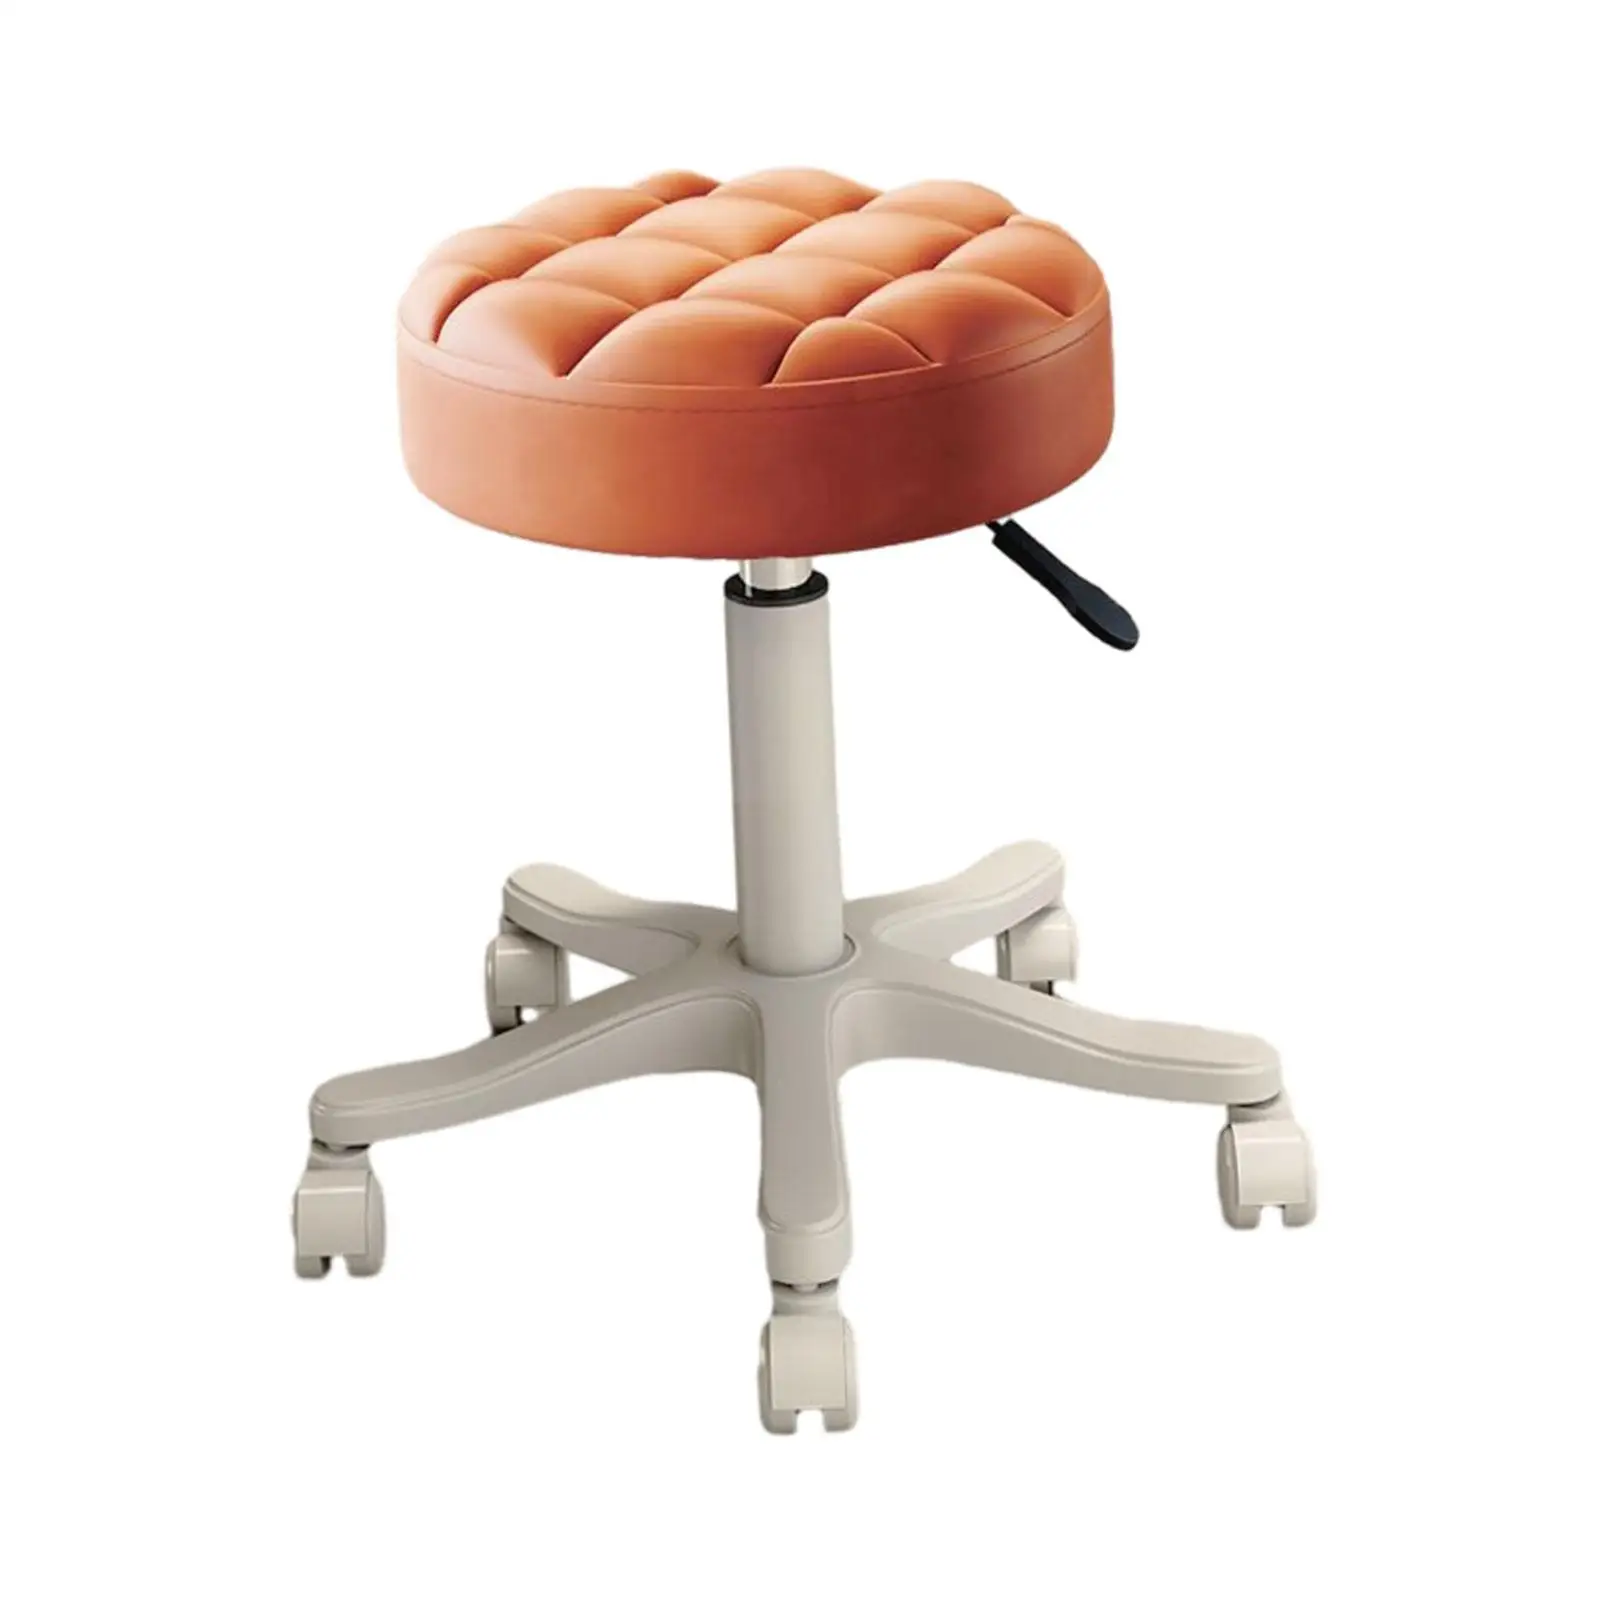 PU Leather Round Rolling Stool Lift Stool Thick Seat Padding Bar Stool with Wheels for Lab, Housework, Barbershop, Home, SPA